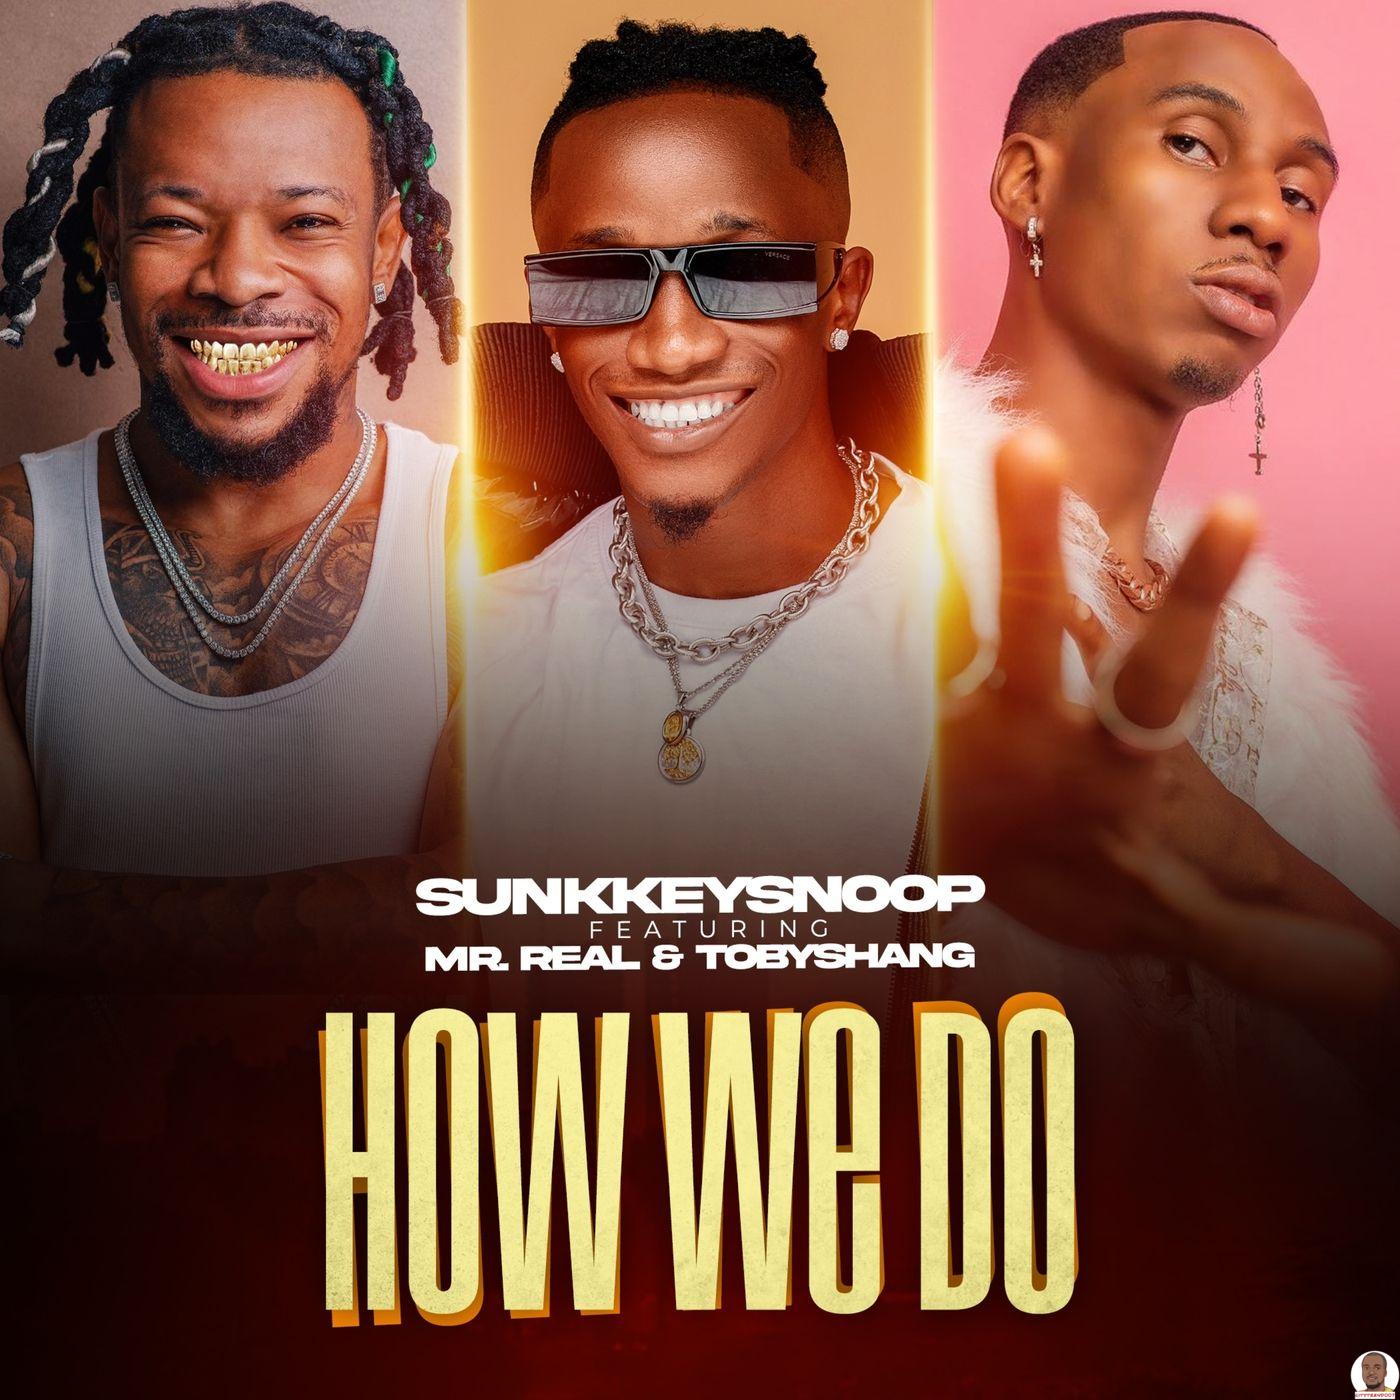 SunkkeySnoop ft. Mr Real Toby Shang — How We Do